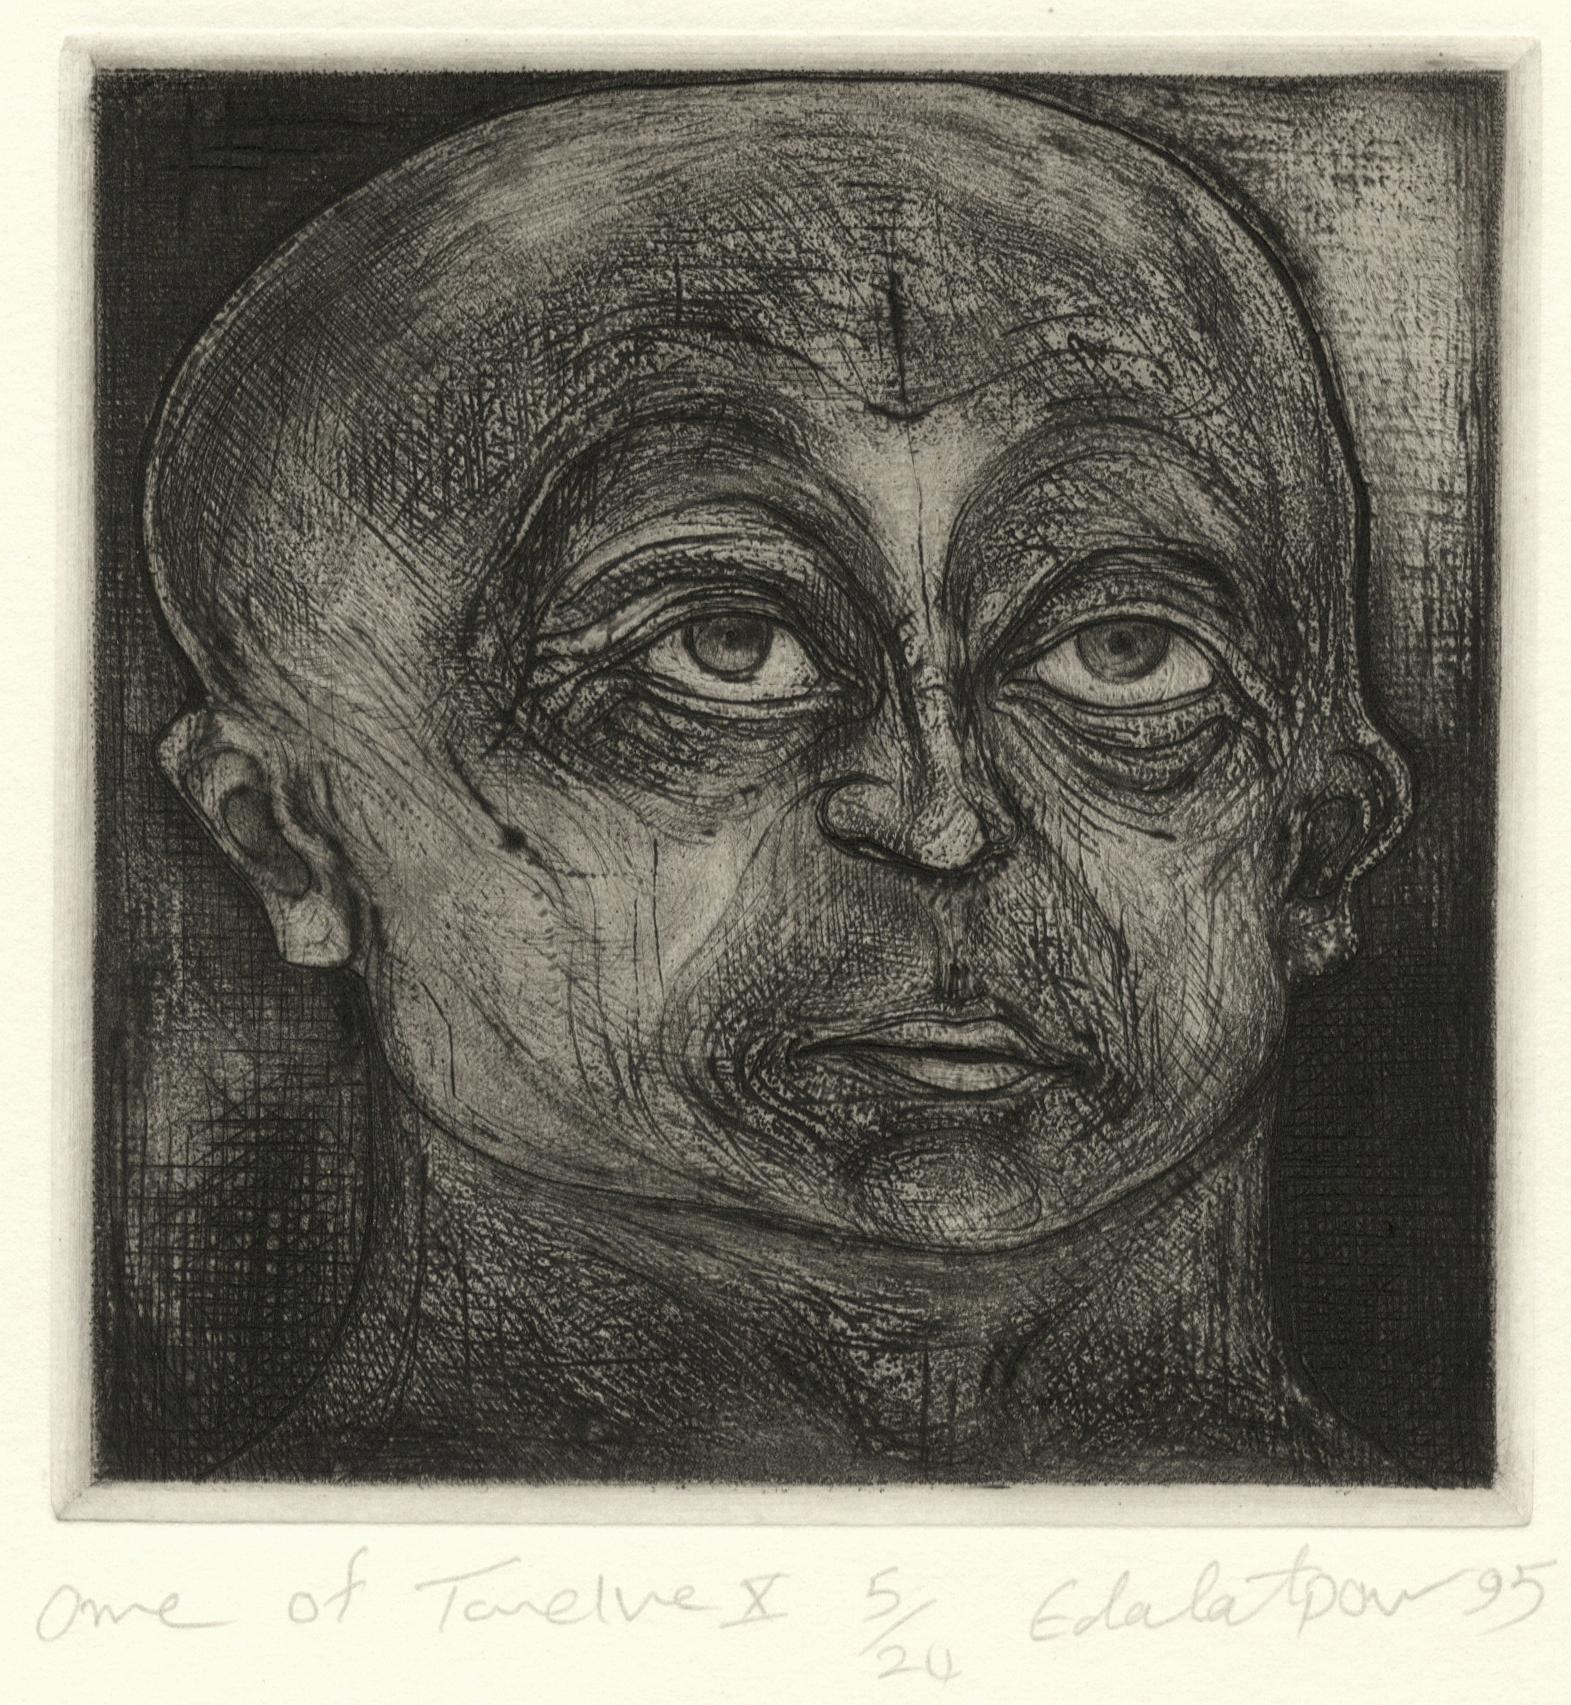 One of Twelve X (etchings of one of 12 heads based on  monumental sculpture) - Black Figurative Print by Seyed M. S. Edalatpour